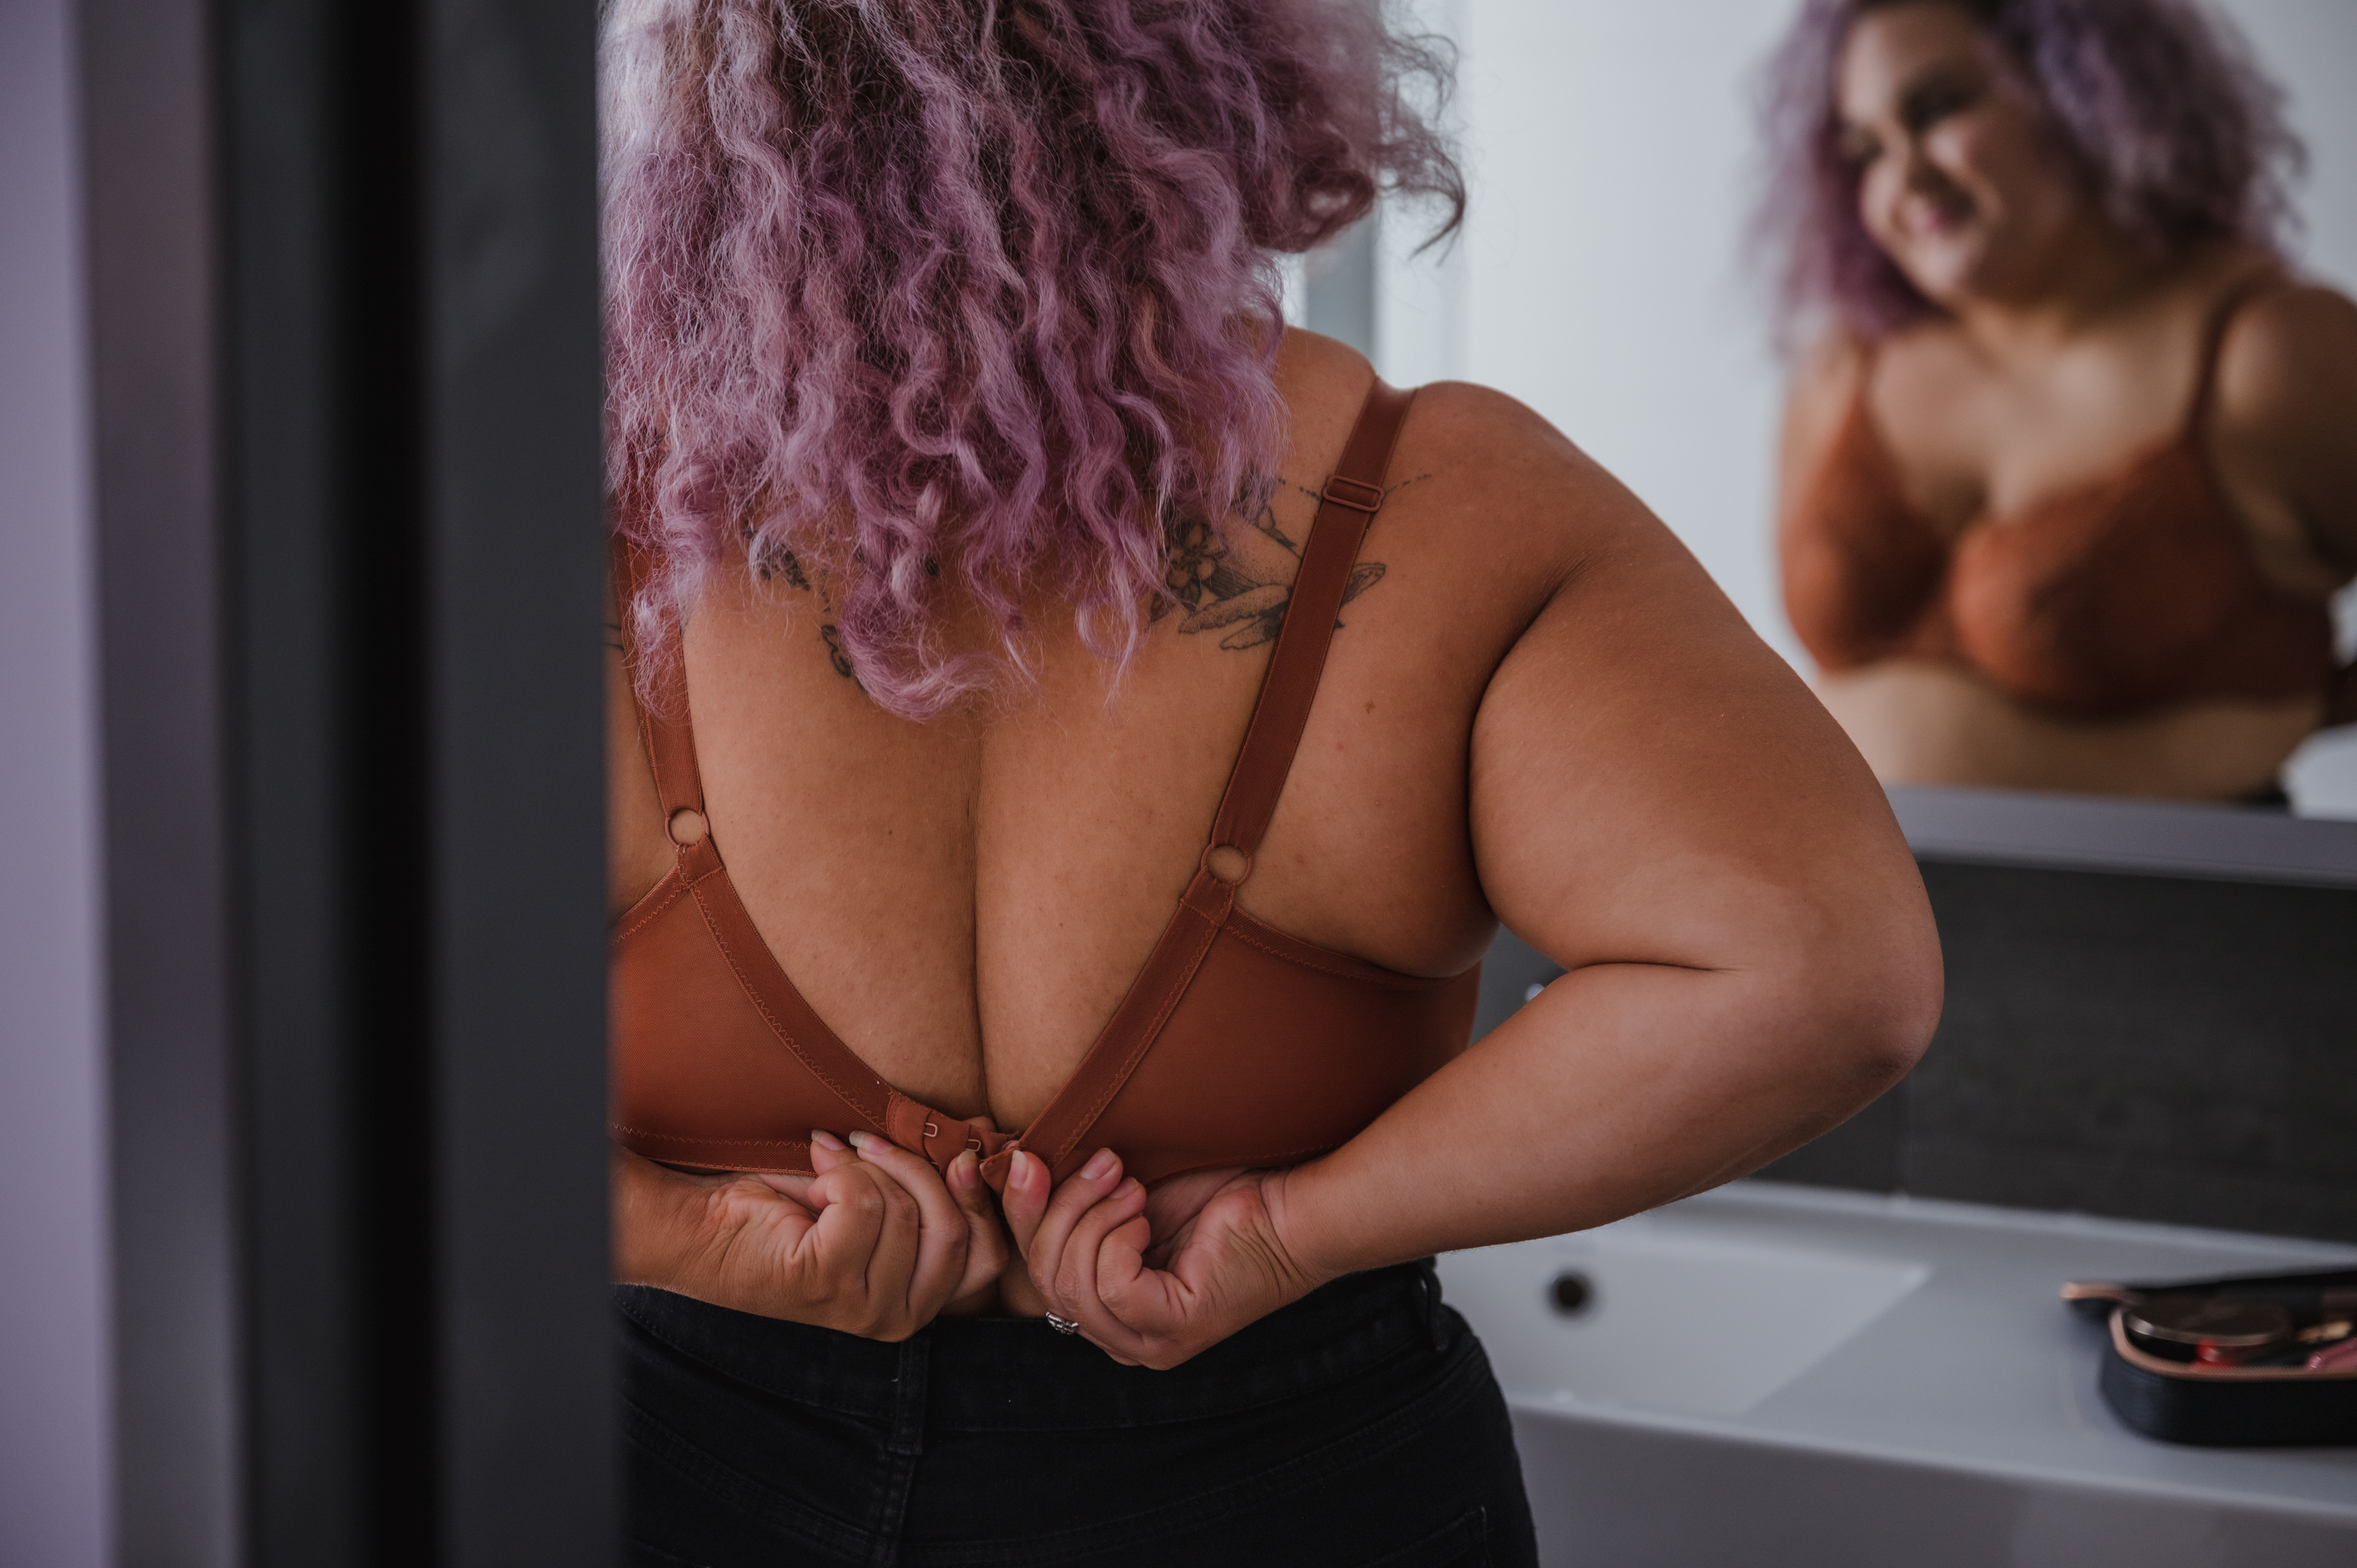 Person clipping bra behind back; reflected in mirror. Expresses self-care or body positivity